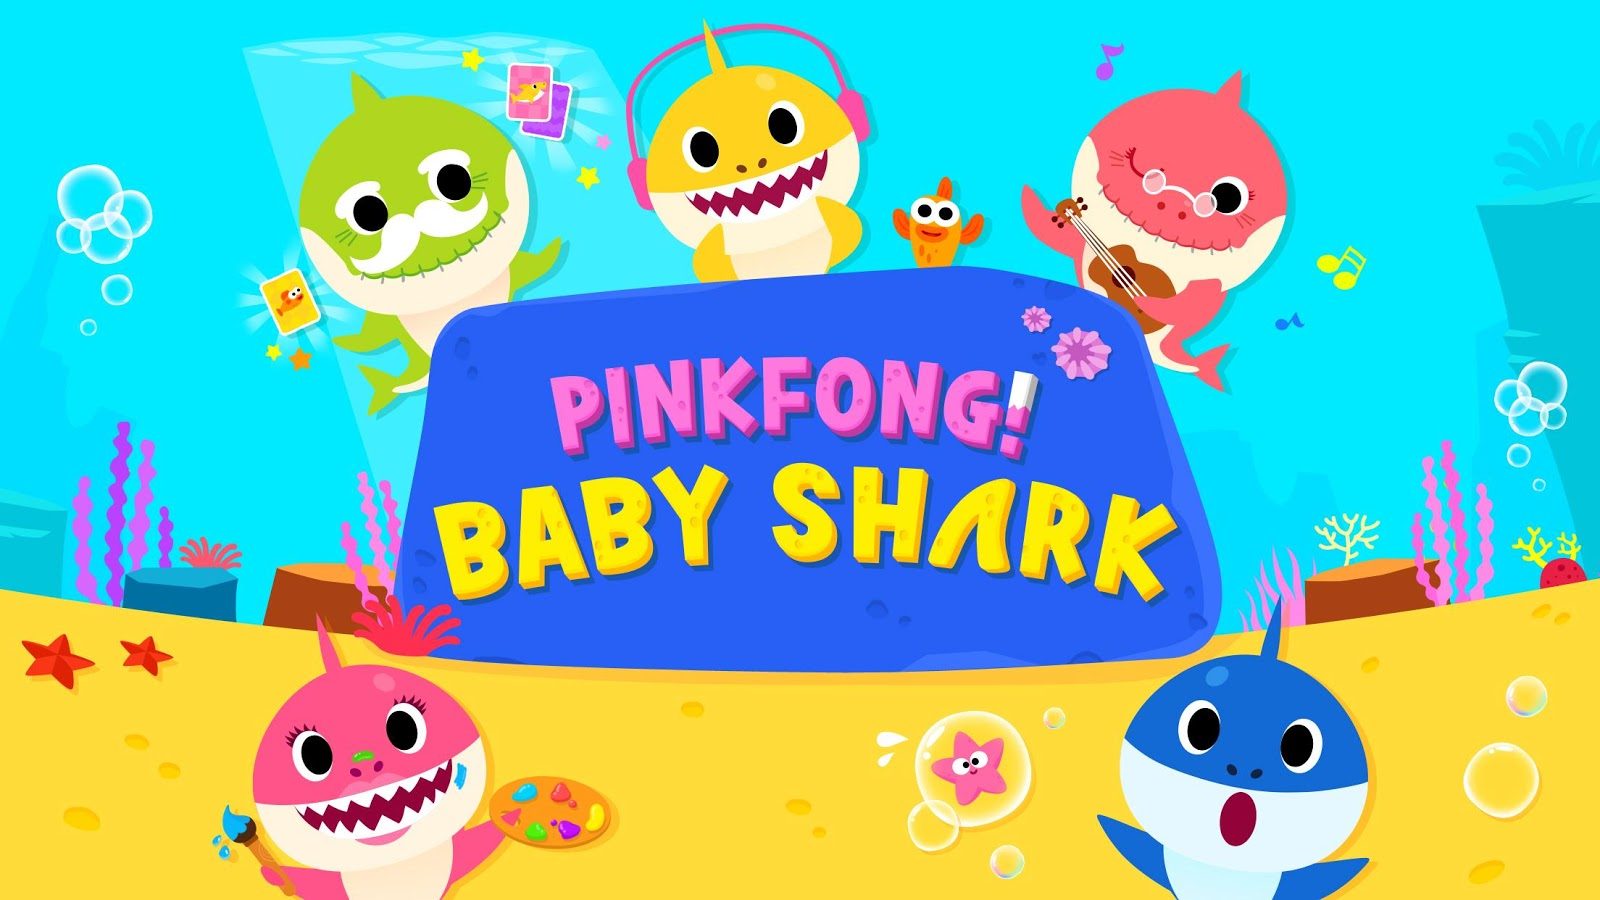 Pinkfong and Baby Shark are coming to Manila!